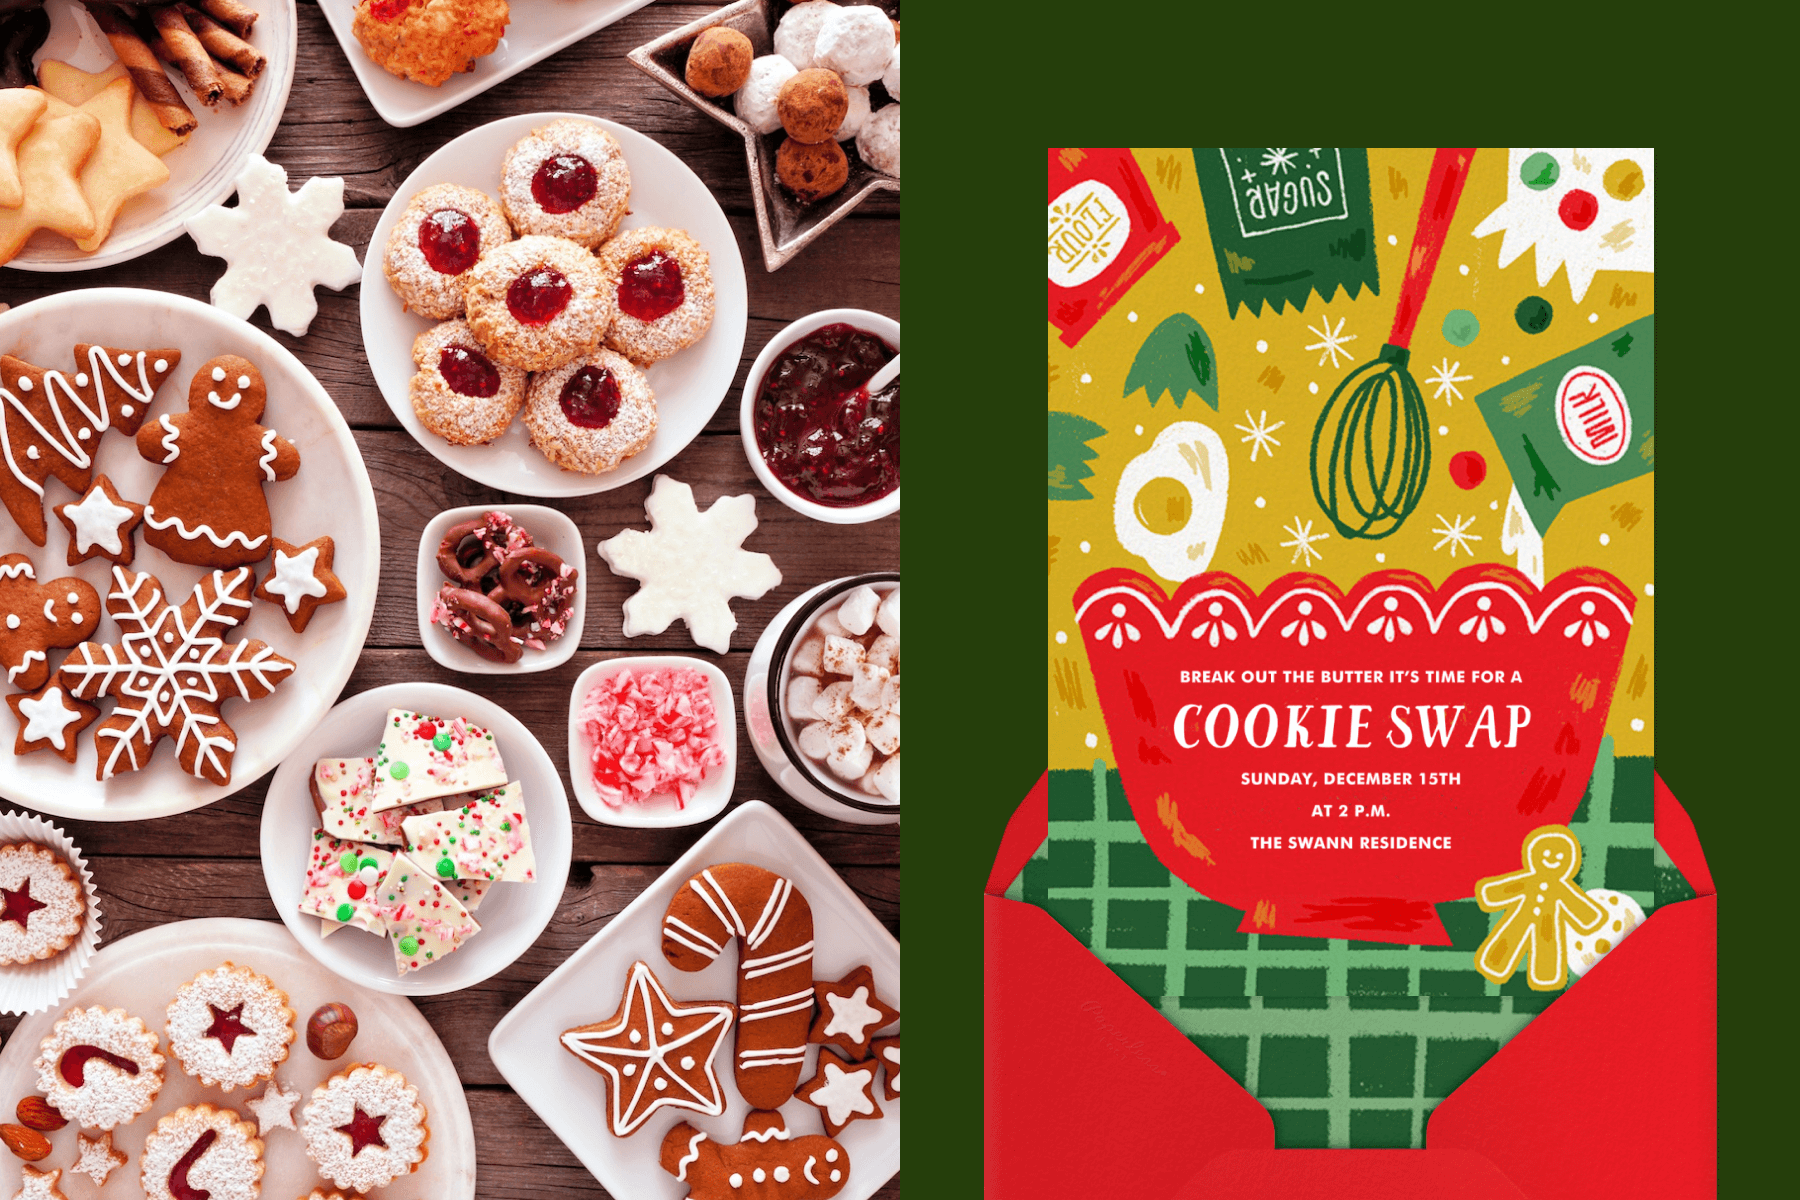 Left: An assortment of holiday cookies on plates; Right: A holiday party invitation with an illustration of cookie-baking supplies.